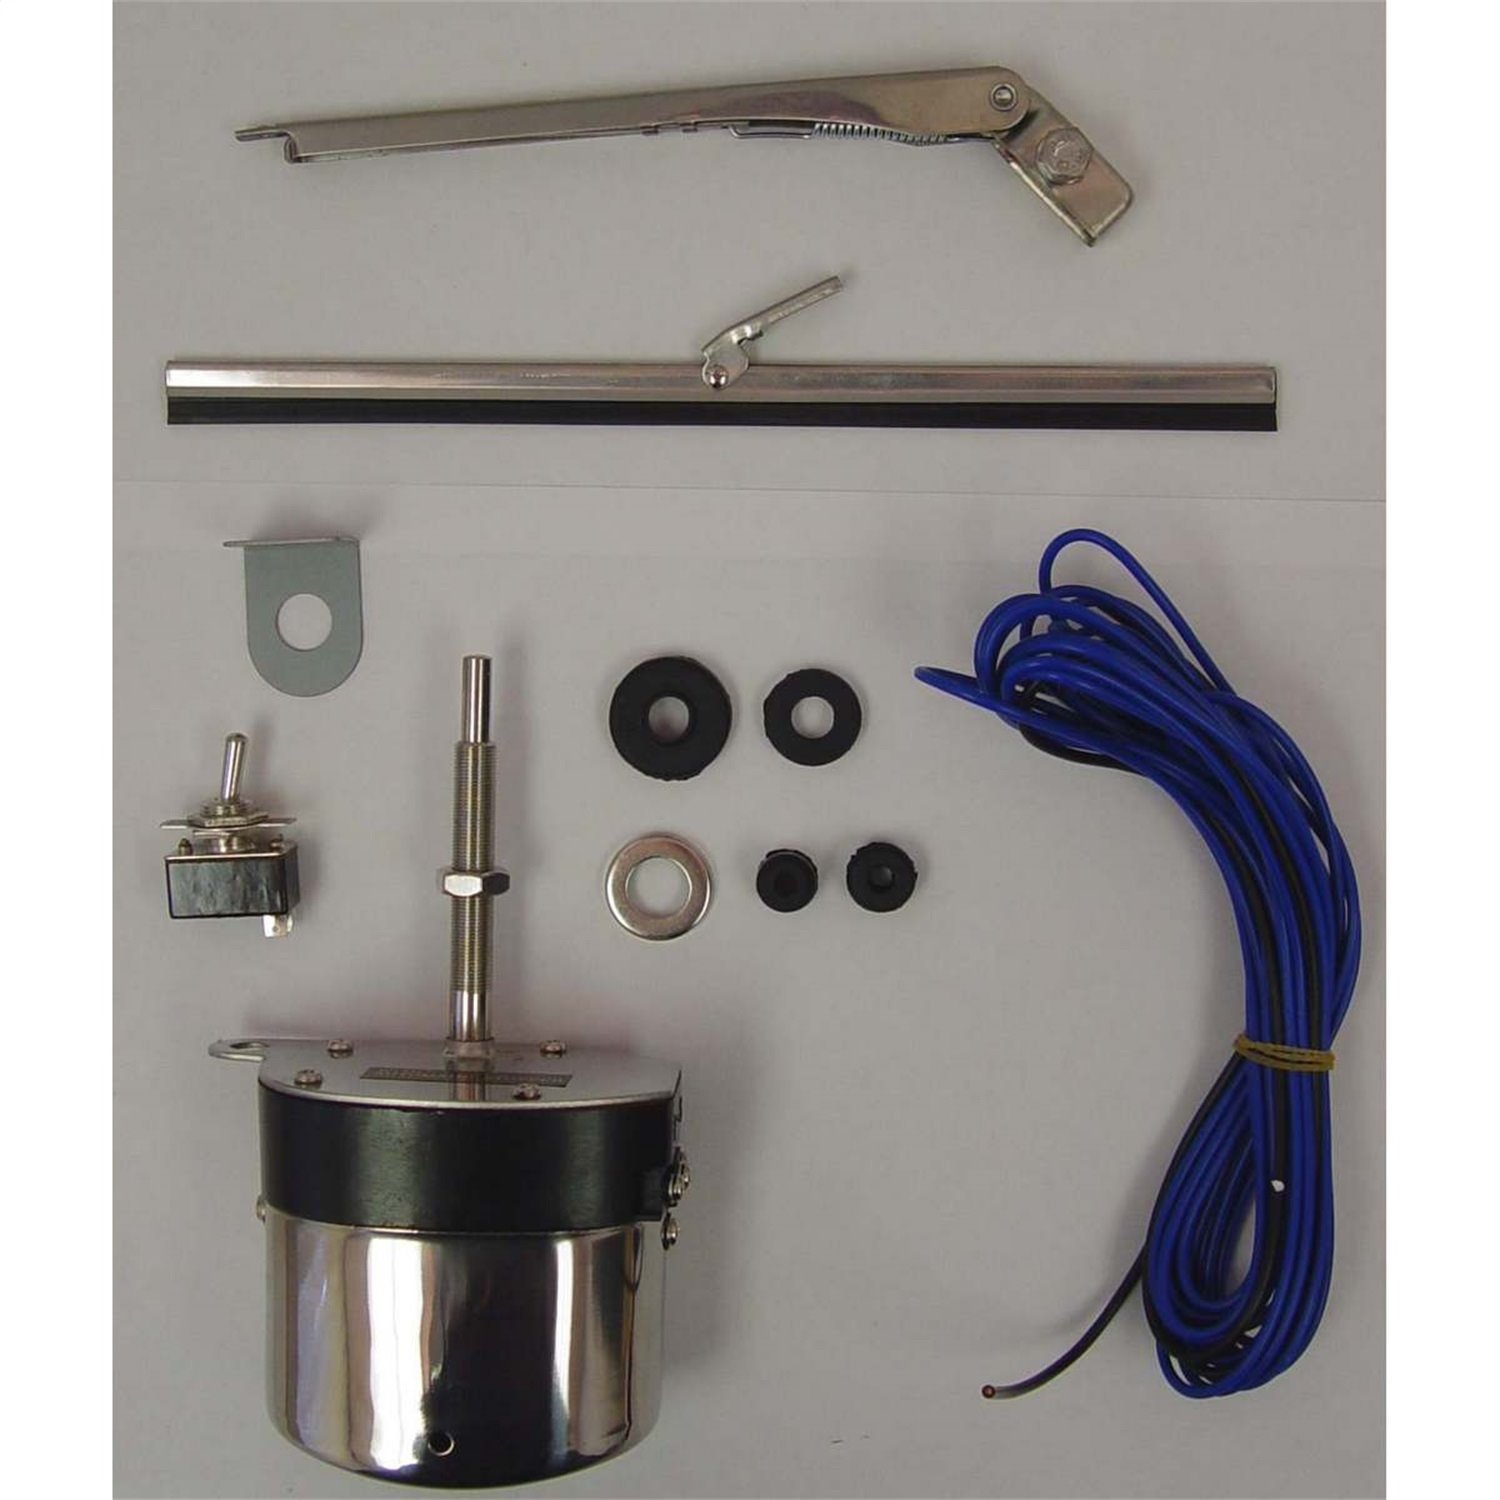 This 12-volt stainless steel windshield wiper motor kit from Omix-ADA fits 59-71 Willys and Jeep models.